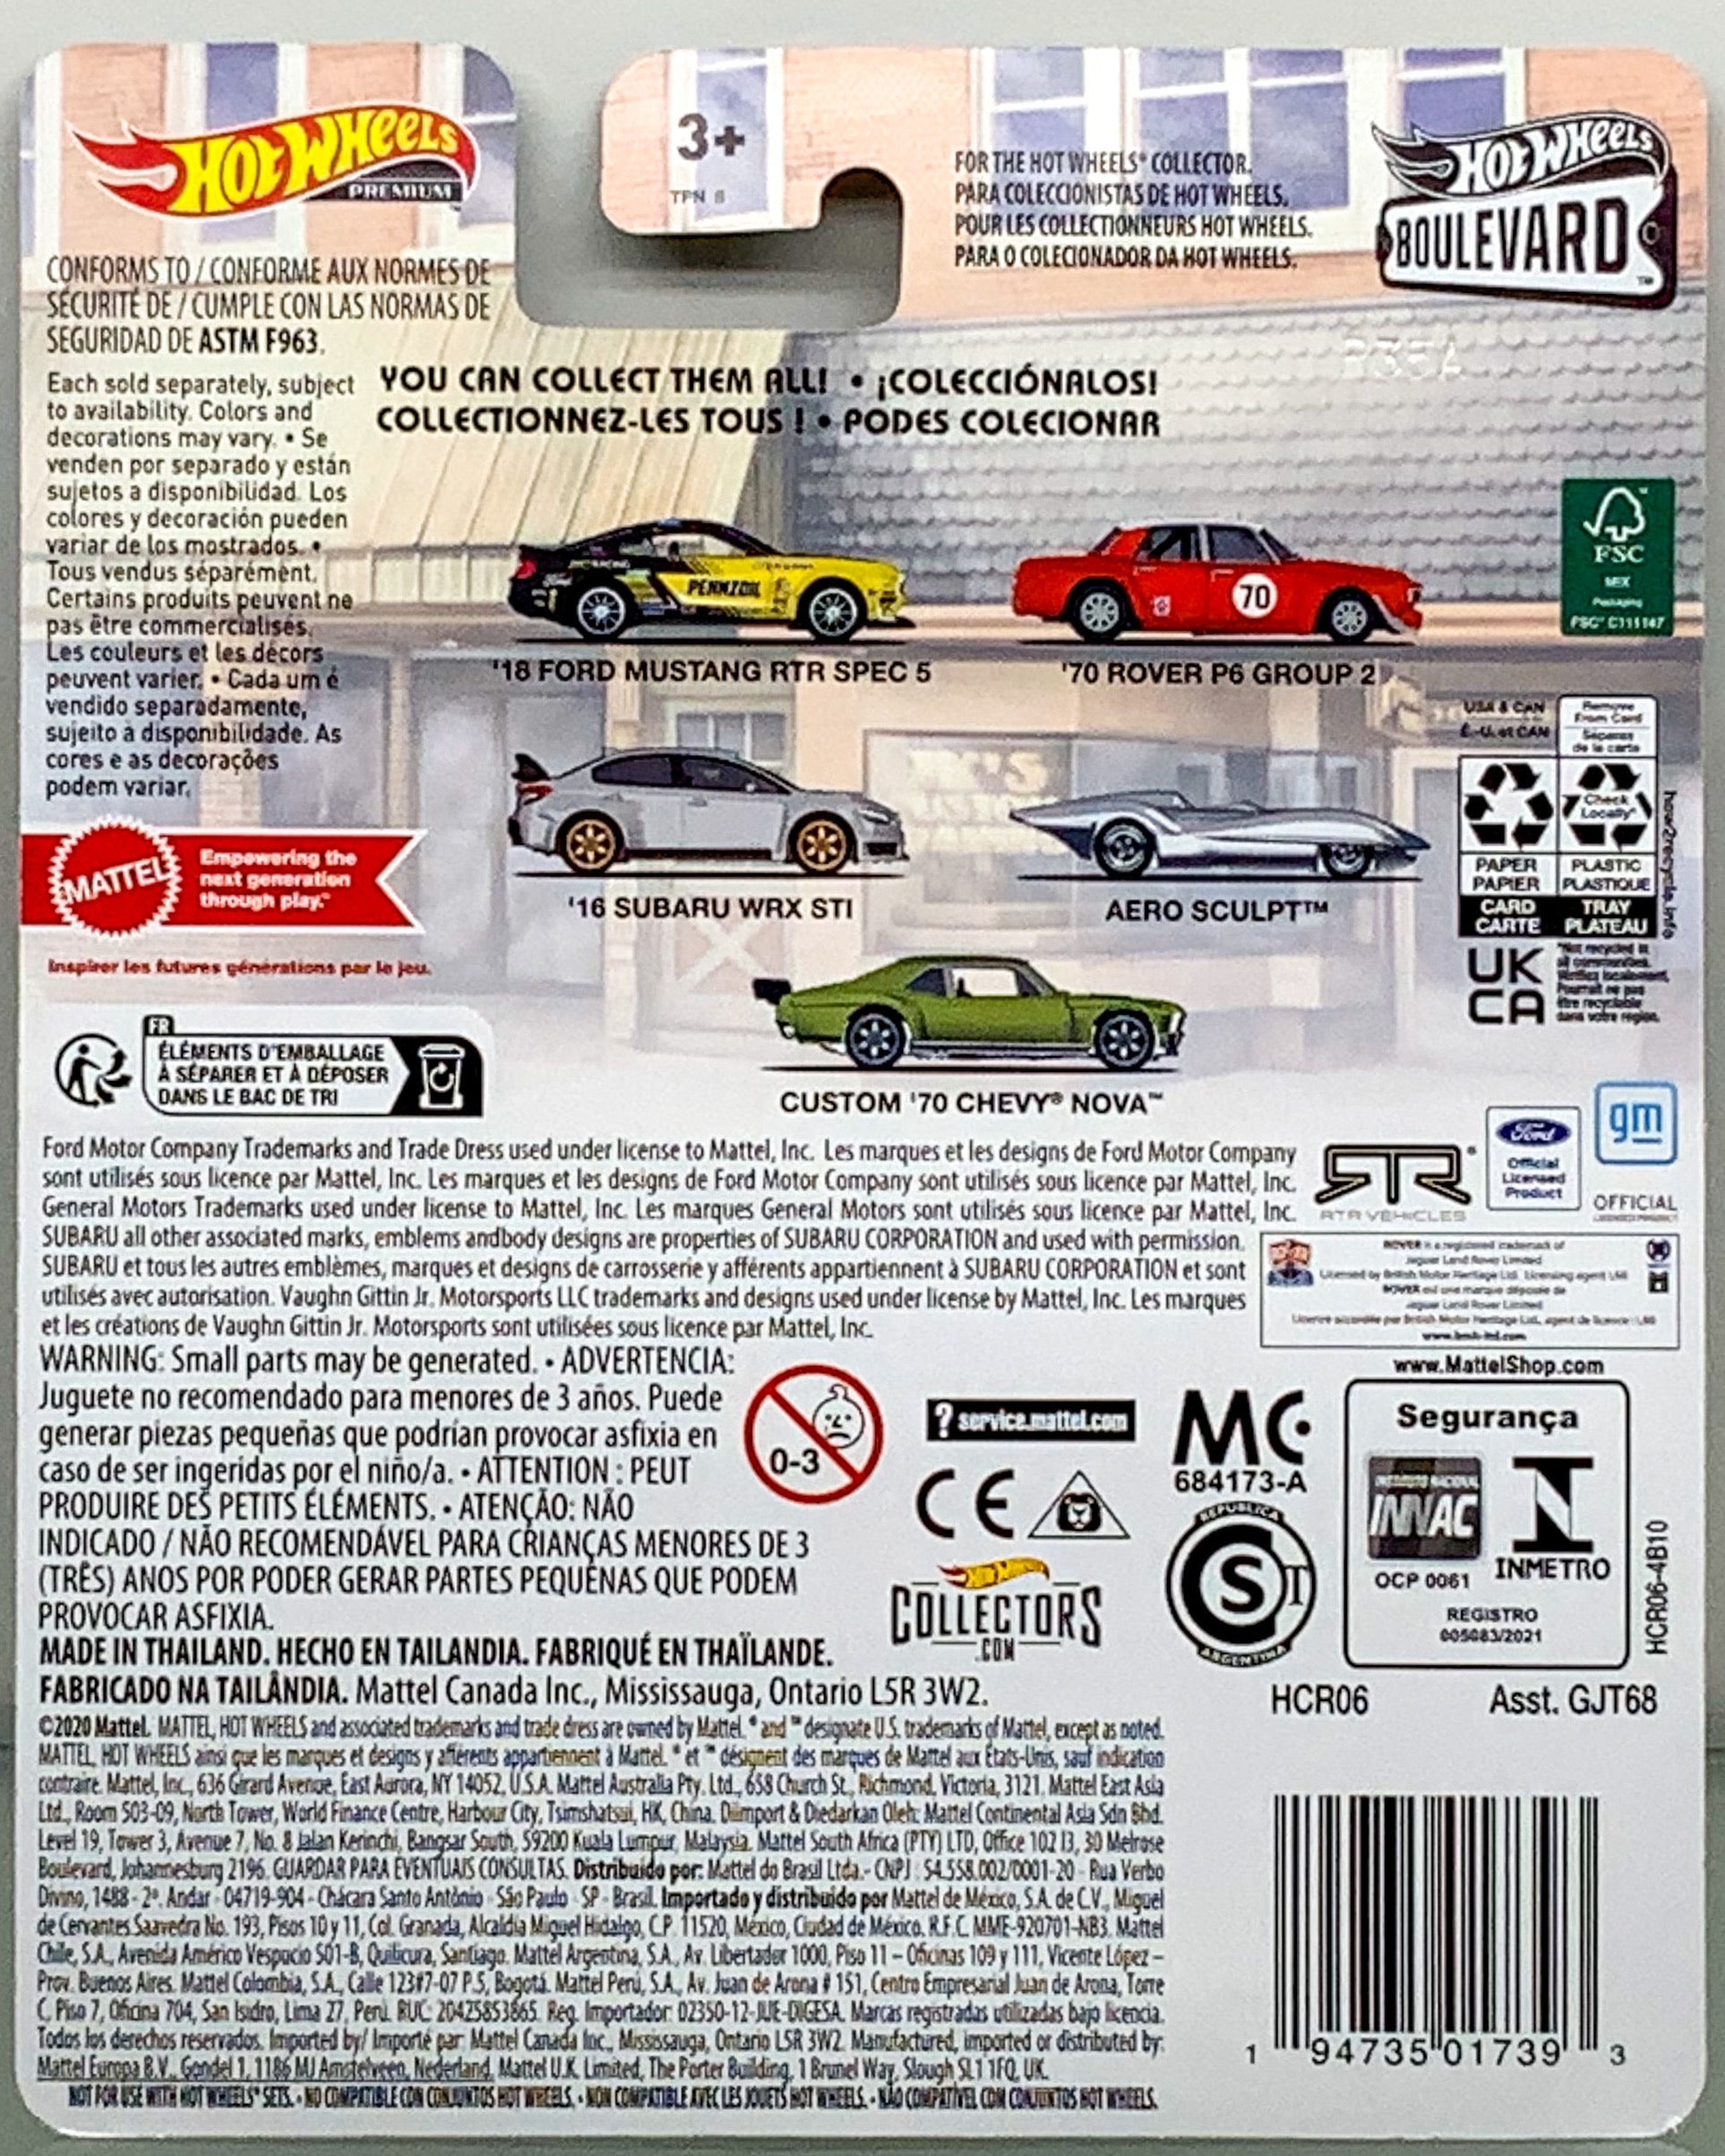 Buy at Tatoy Shop.com The back of the Card shows the 5 Cars on Series Ford, Rover P6 Group 2, Subaru WRX, Aero Sculpt, Custom Chevy Premium Collections